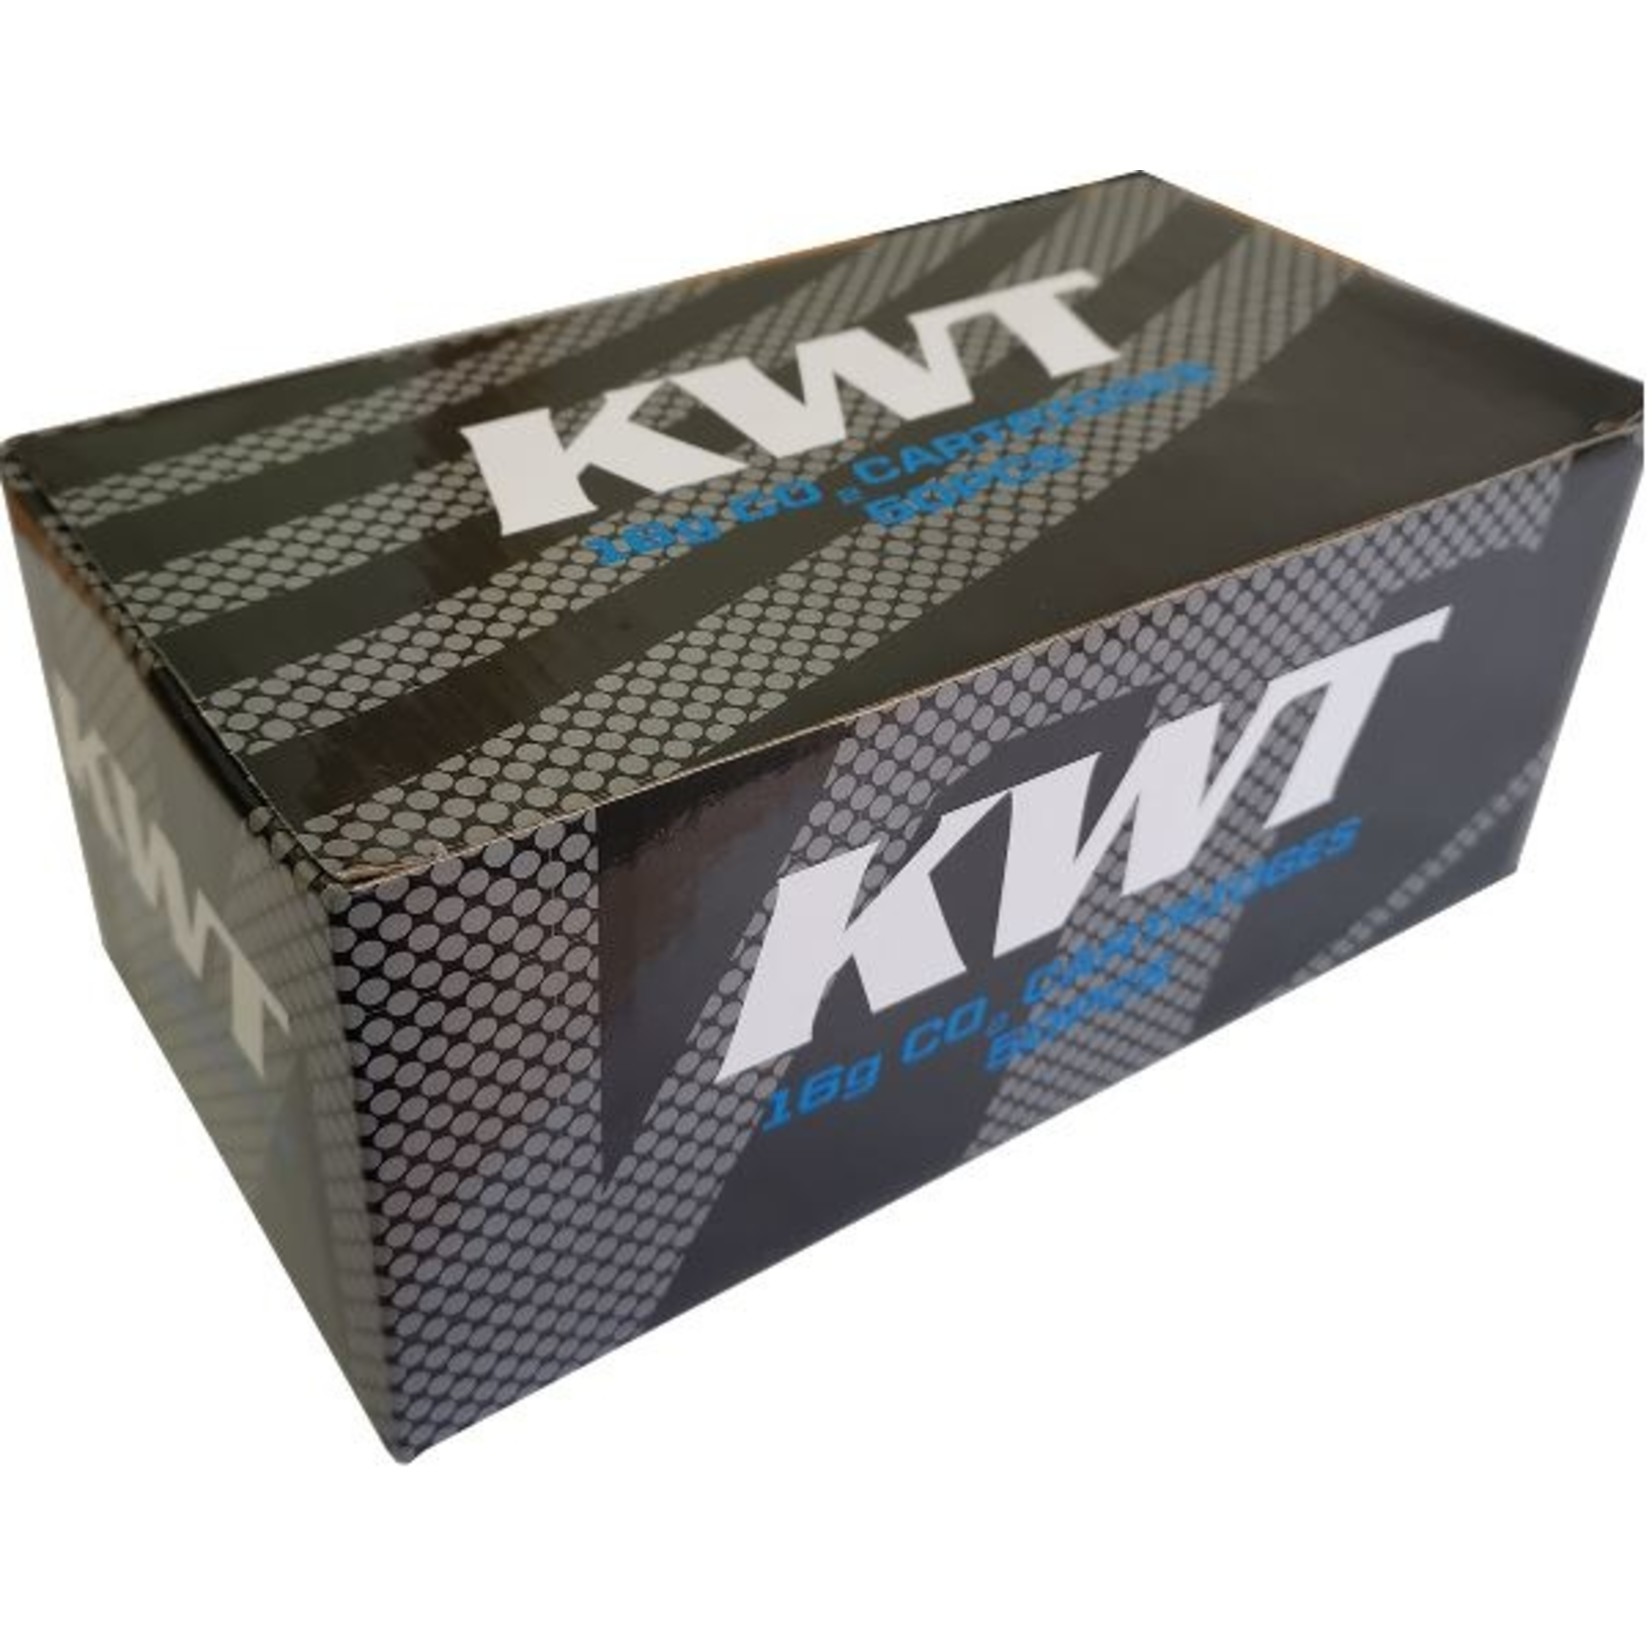 KWT KWT Bicycle CO2 And Inflators 16G Threaded 50 Pcs/Box - Rocket Branded 90c Each